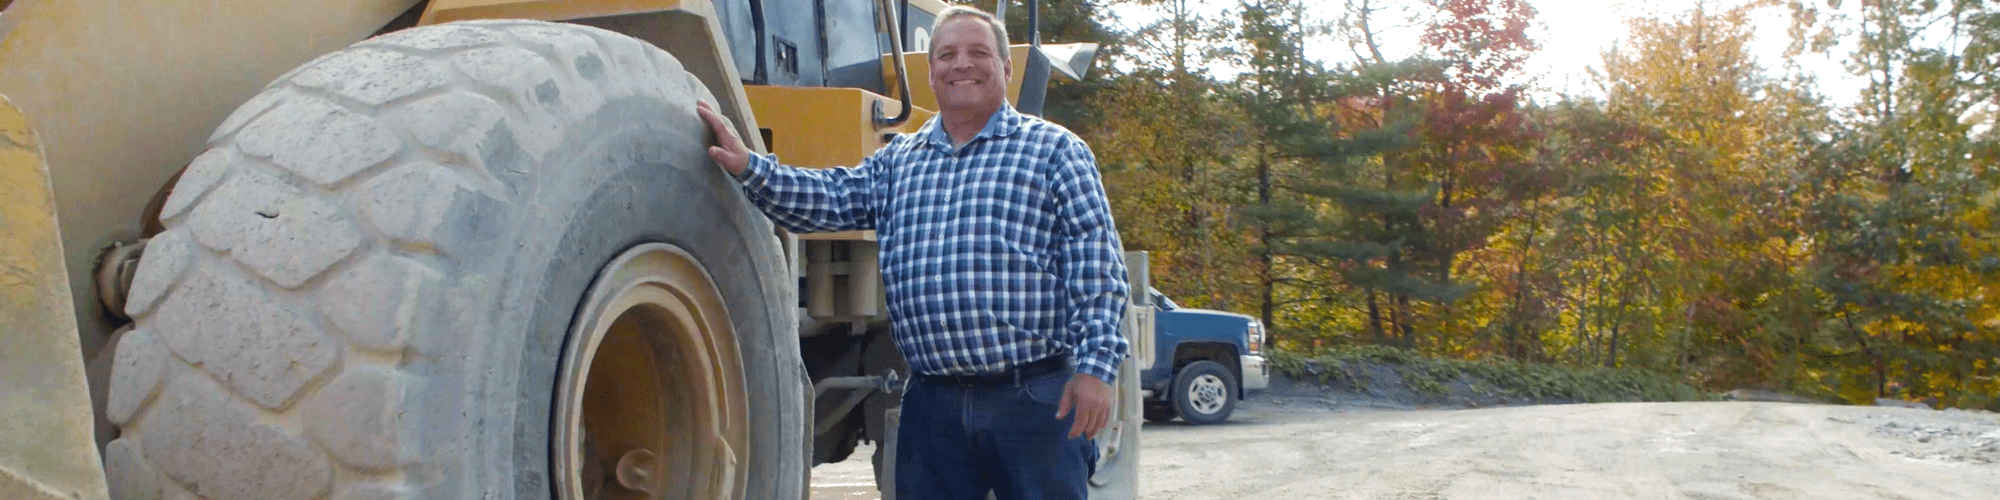 A man smiling while standing next to a bucket loader